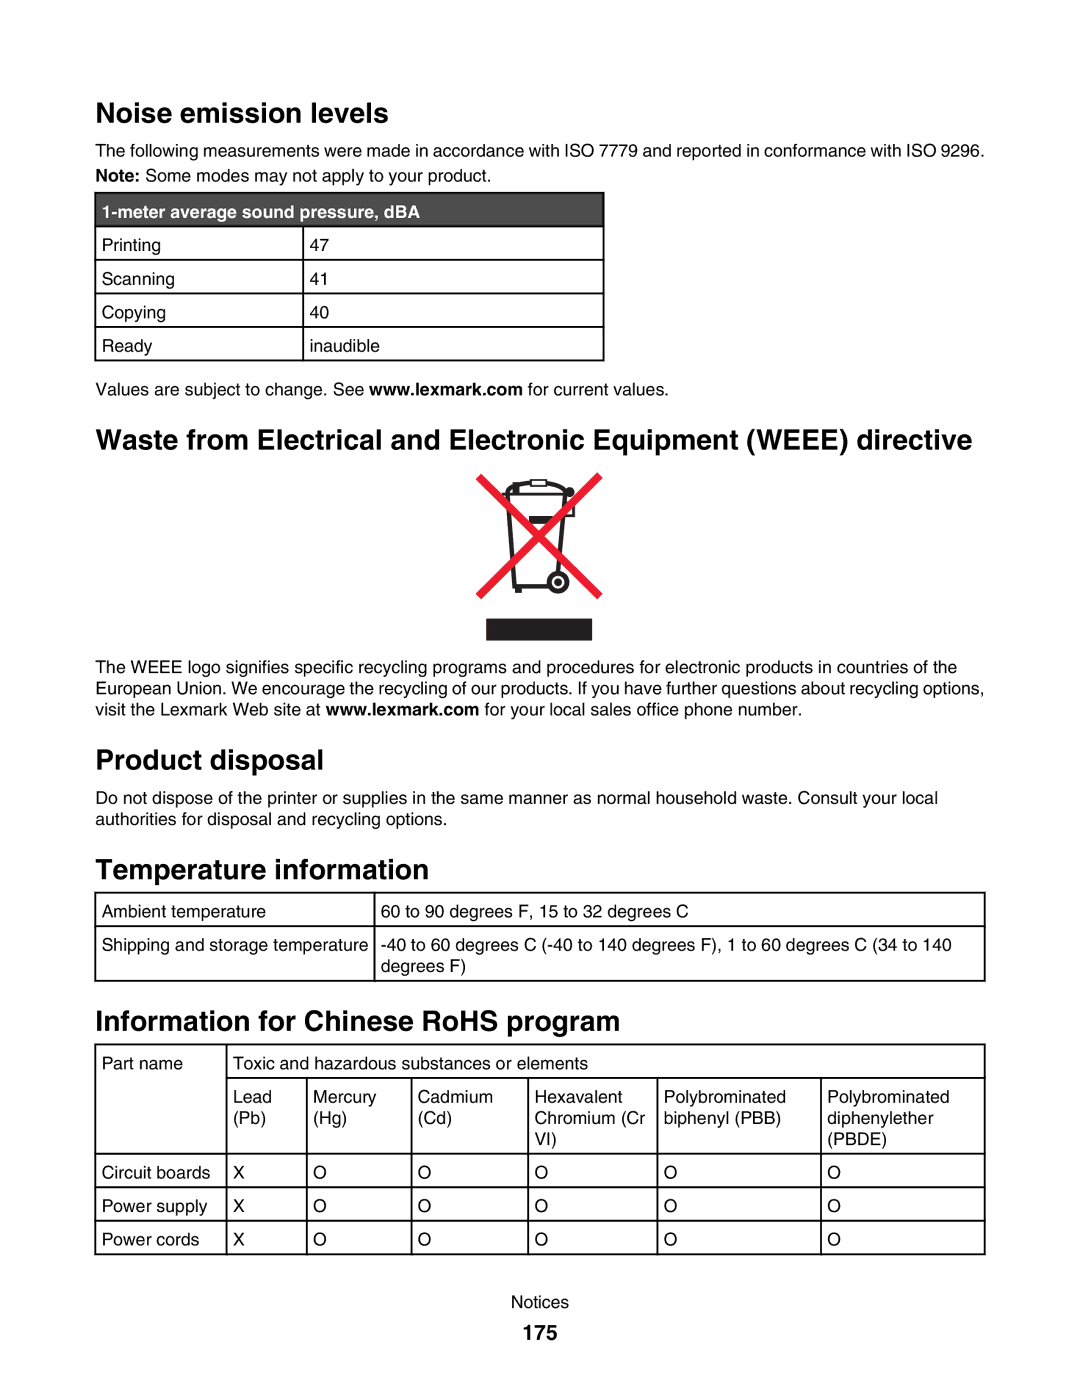 Lexmark 5000 Series manual Noise emission levels, Temperature information, Information for Chinese RoHS program, 175 